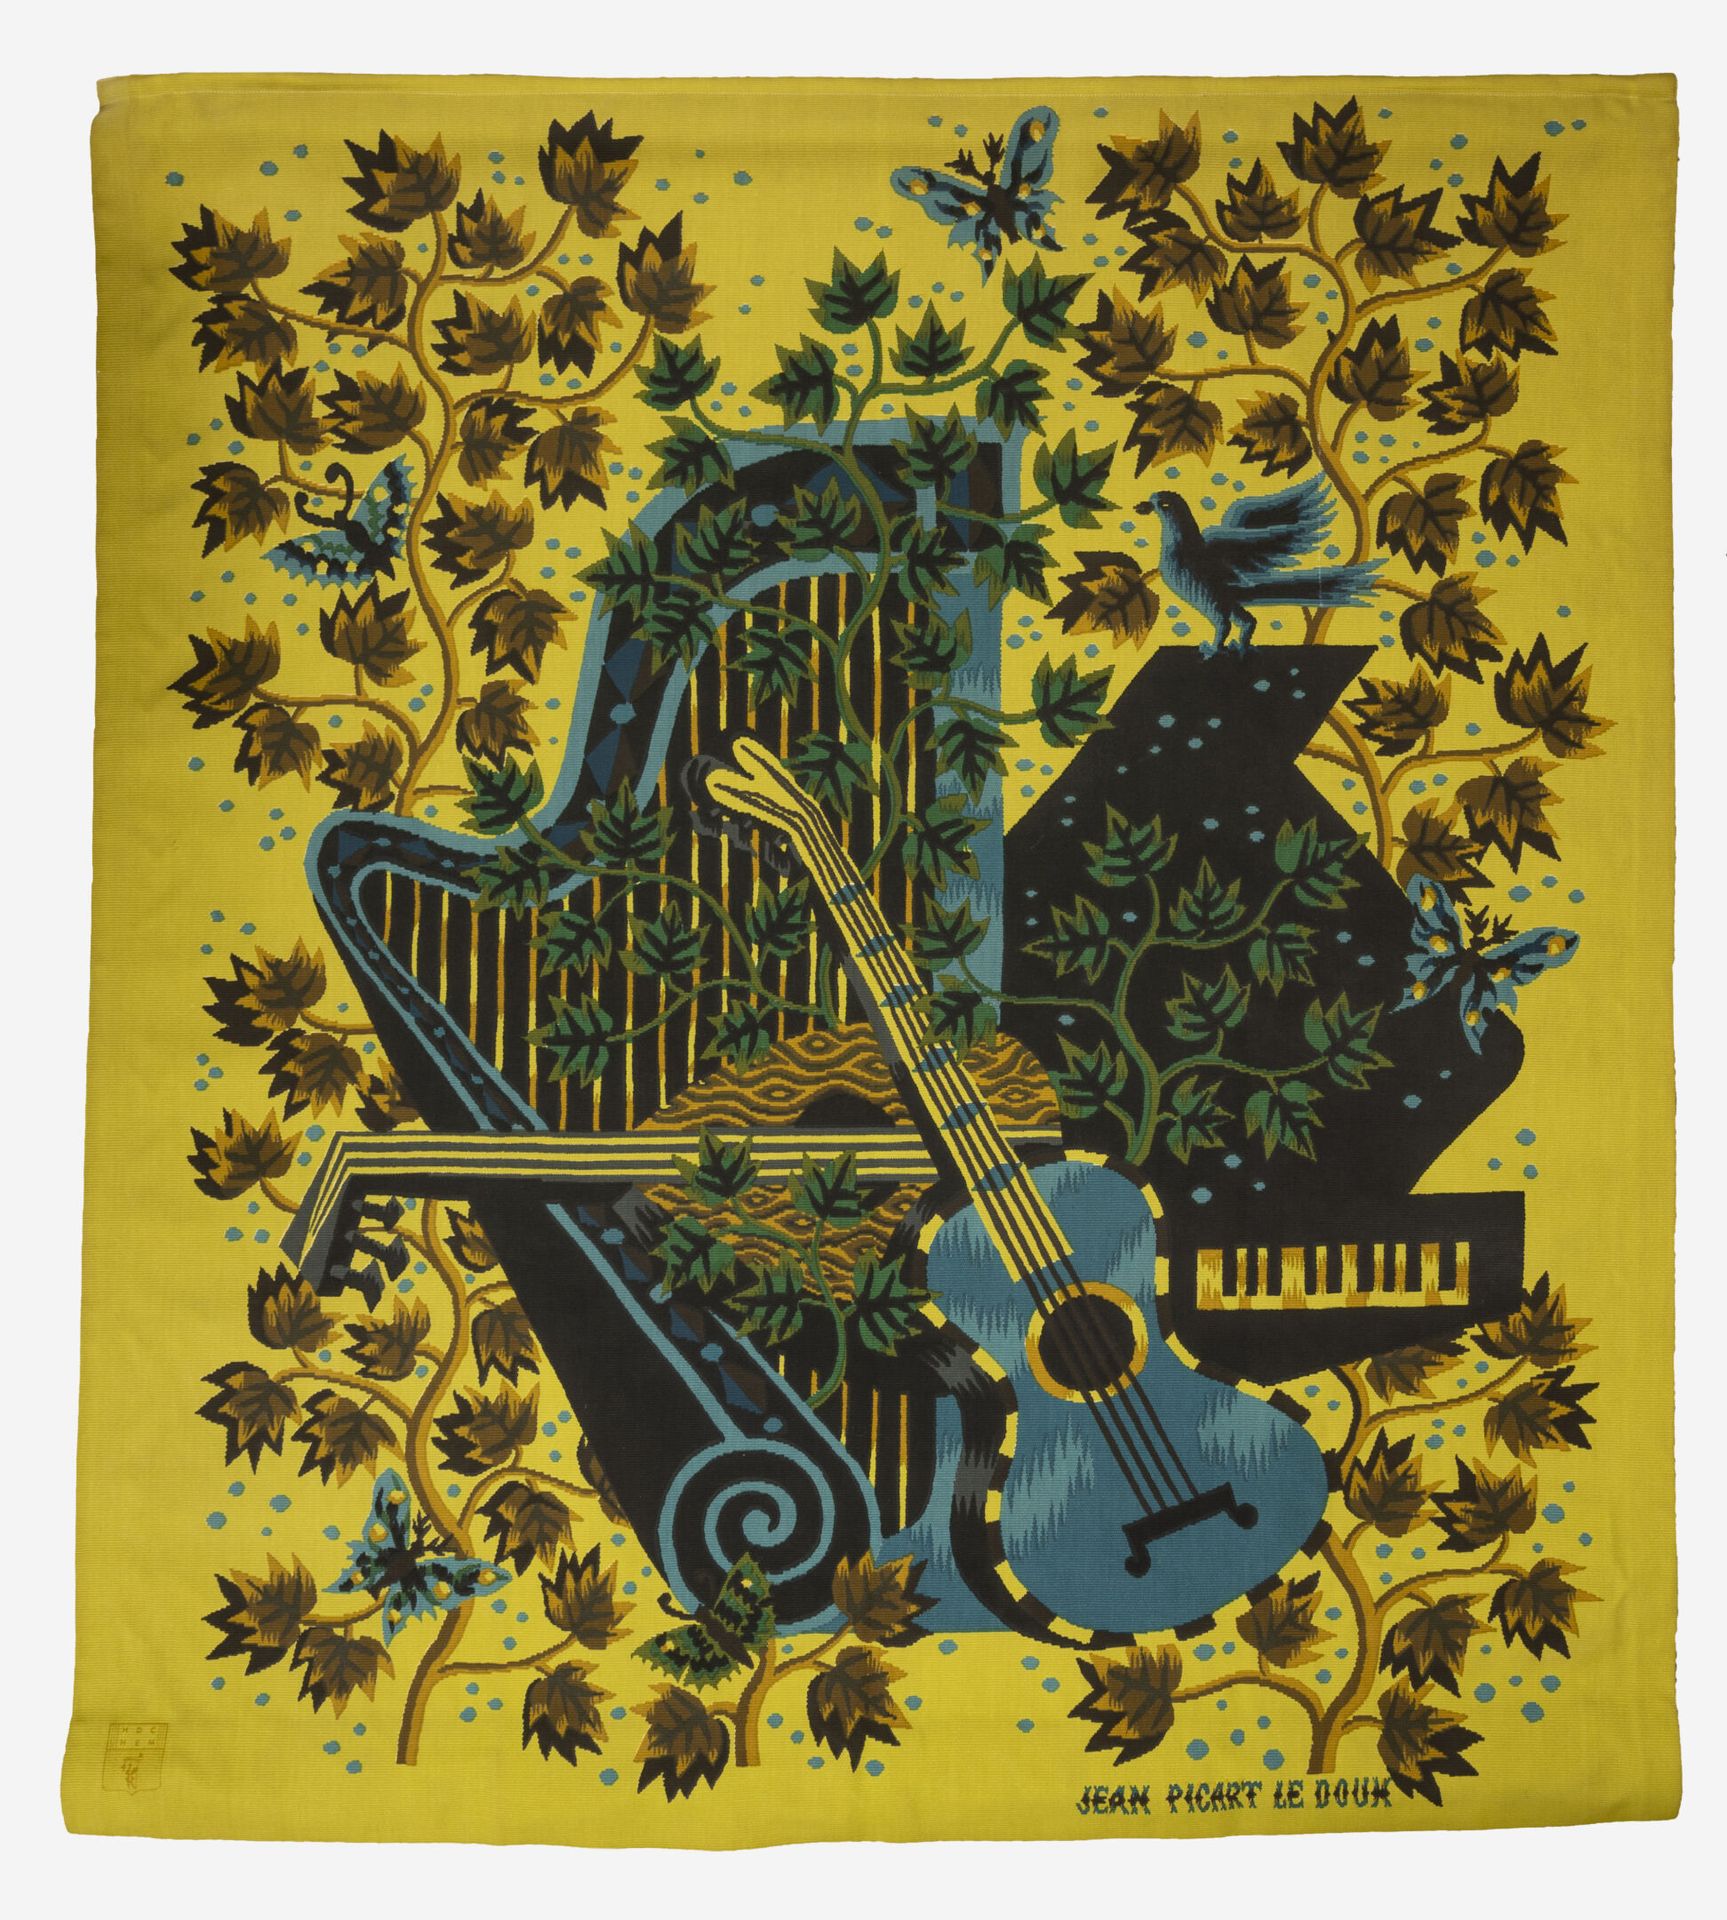 Jean PICART LE DOUX (1902-1982) Concerto.

Wall hanging.

Silk-screen printing o&hellip;